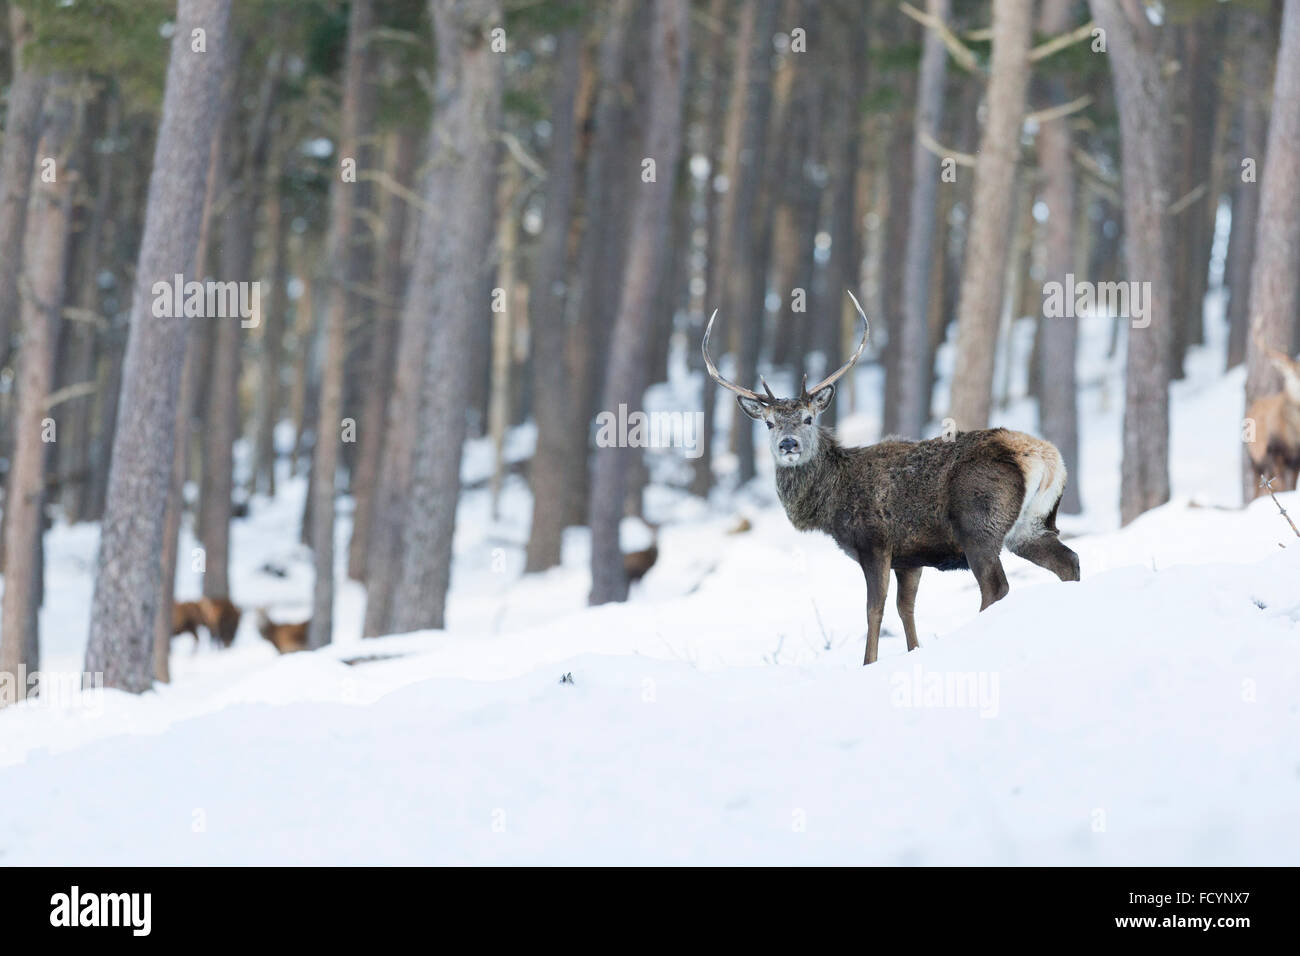 Scottish stag in snowy woodland setting Stock Photo